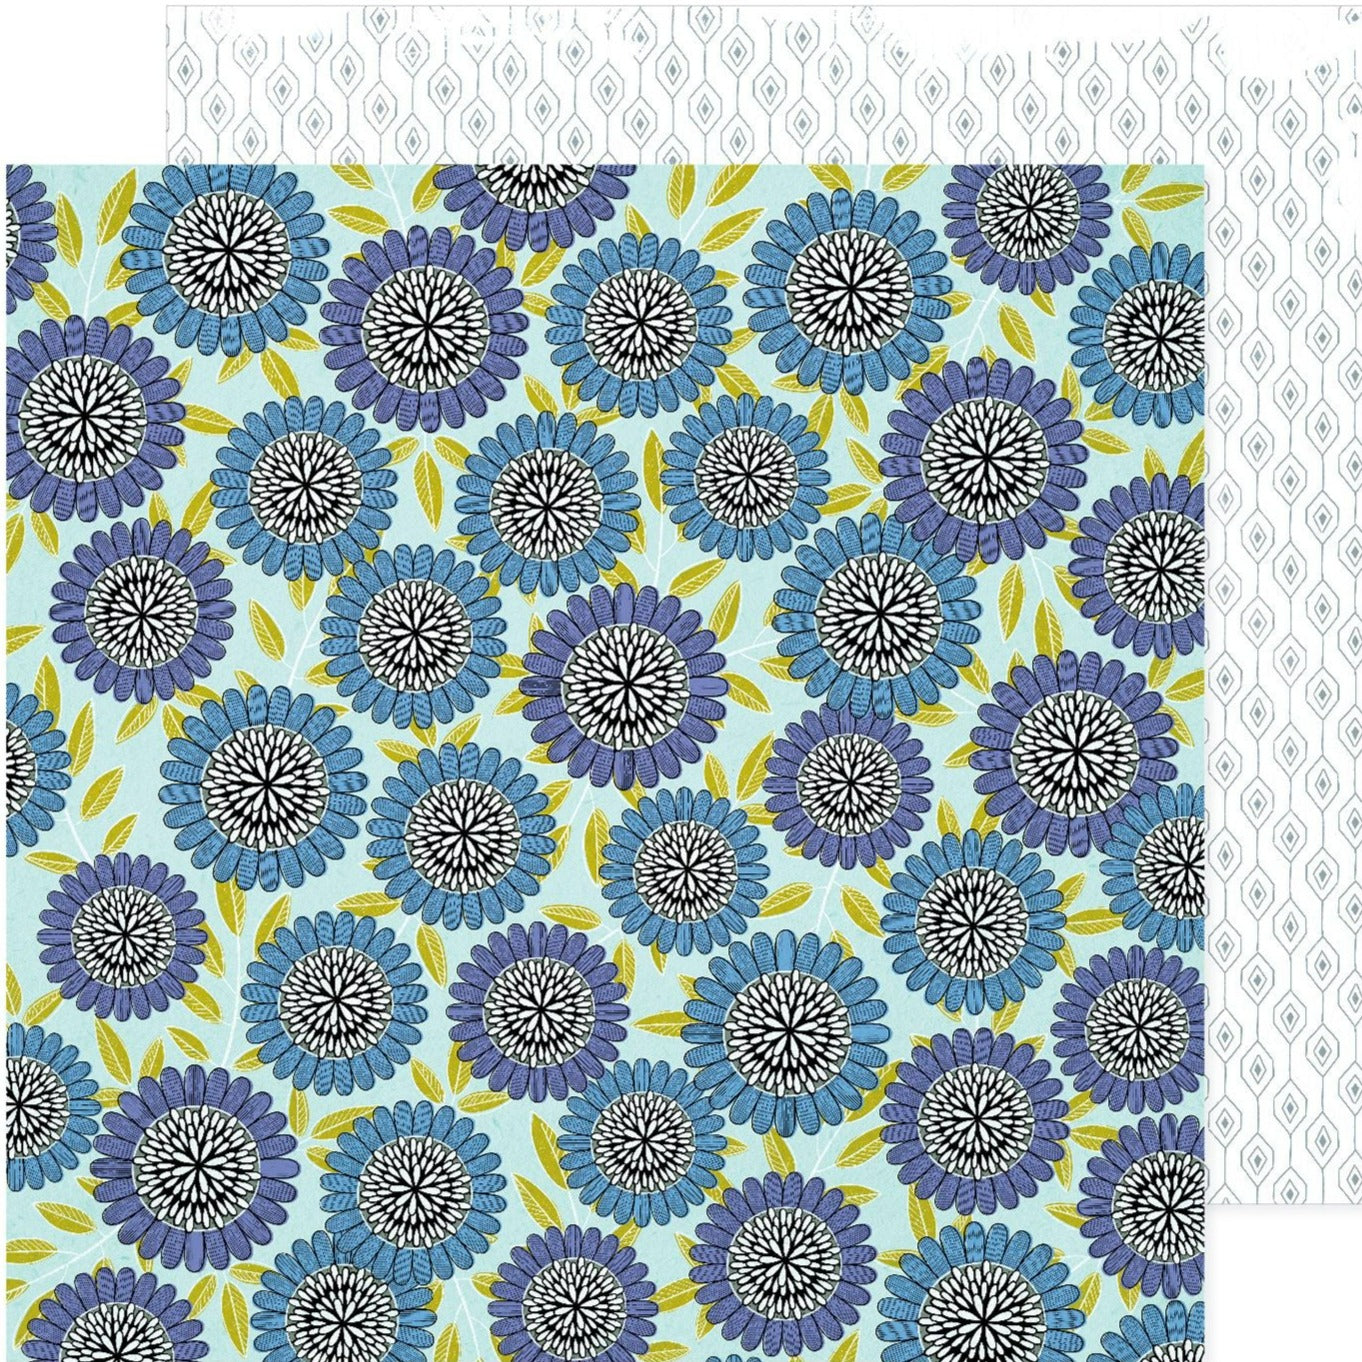 (Side A - beautiful cornflowers in blues on a light blue background, Side B12x12 p(Side A - beautiful cornflowers in blues on a light blue background, Side B - blue pattern on a white background) - Archival-safe and acid-free from American Crafts - blue pattern on a white background)